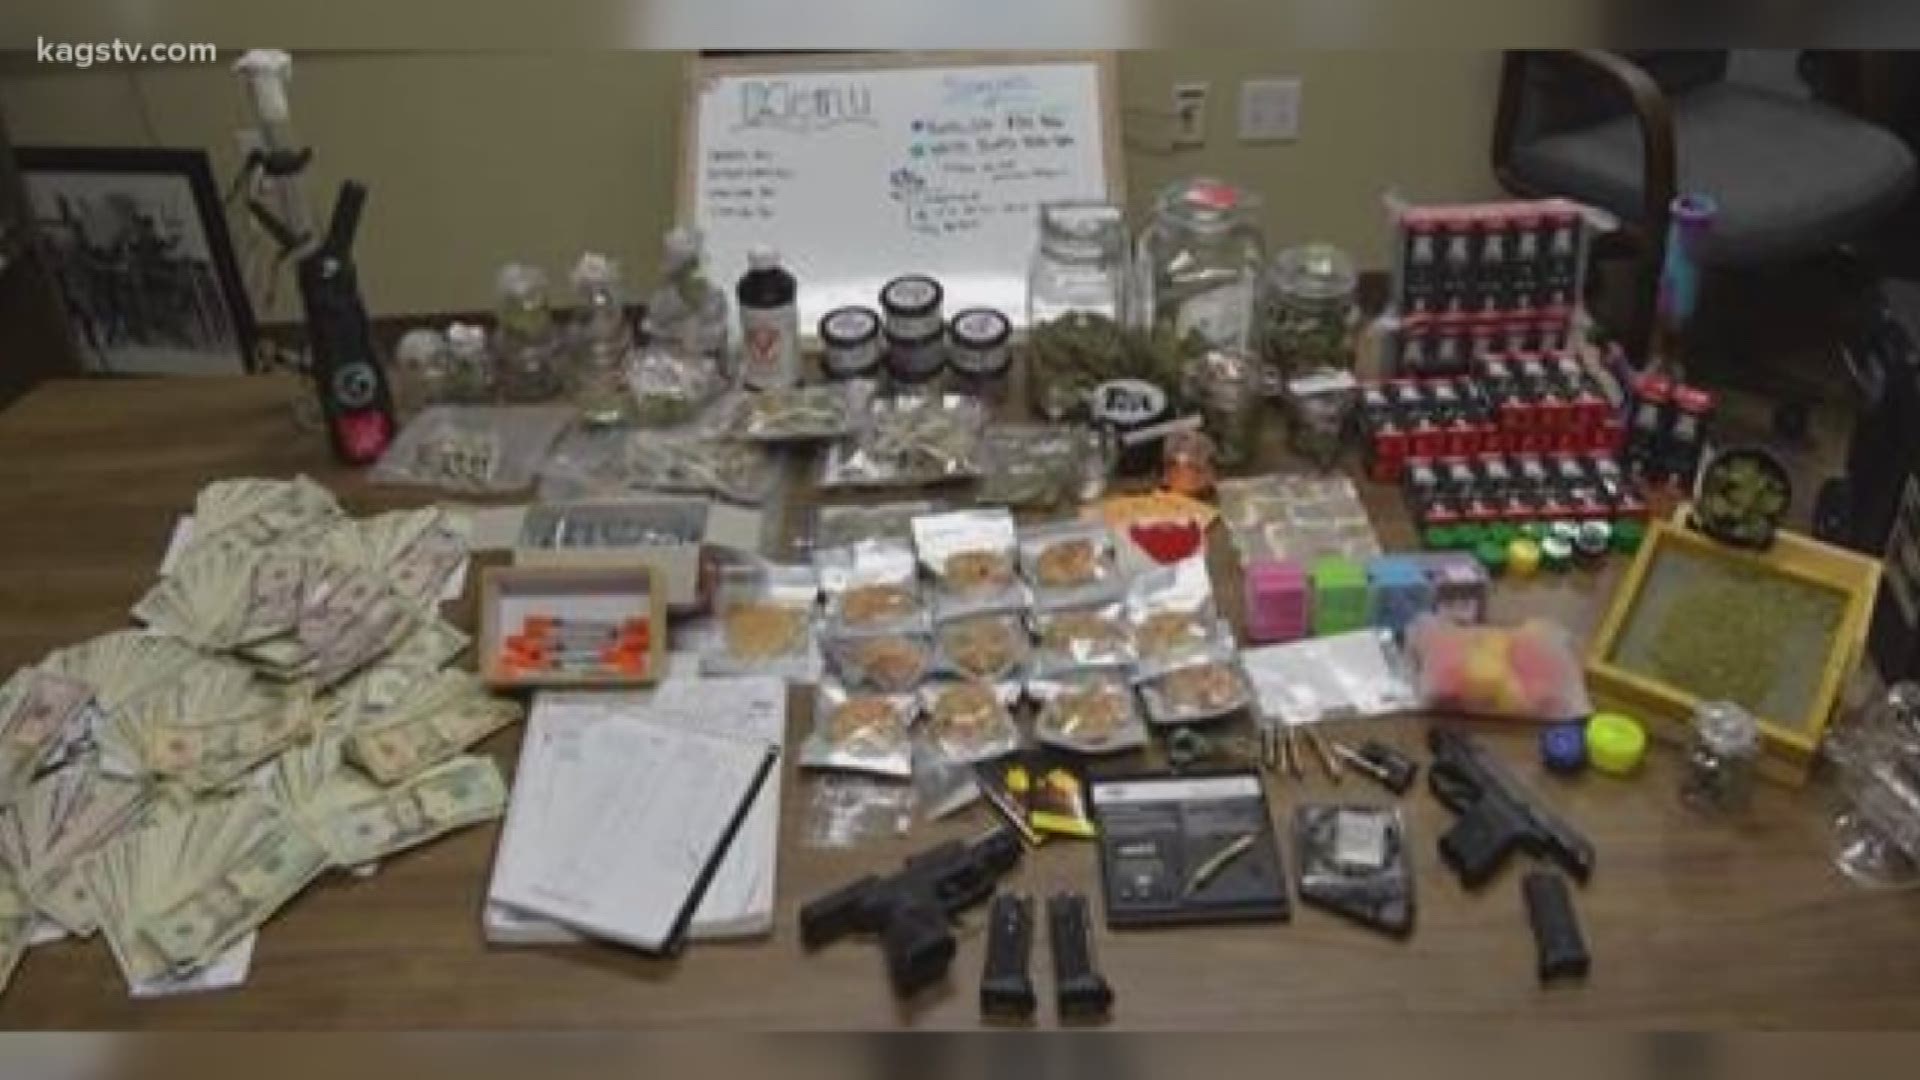 Tens of thousands of dollars worth of drugs off the streets after three busts in the course of a week.